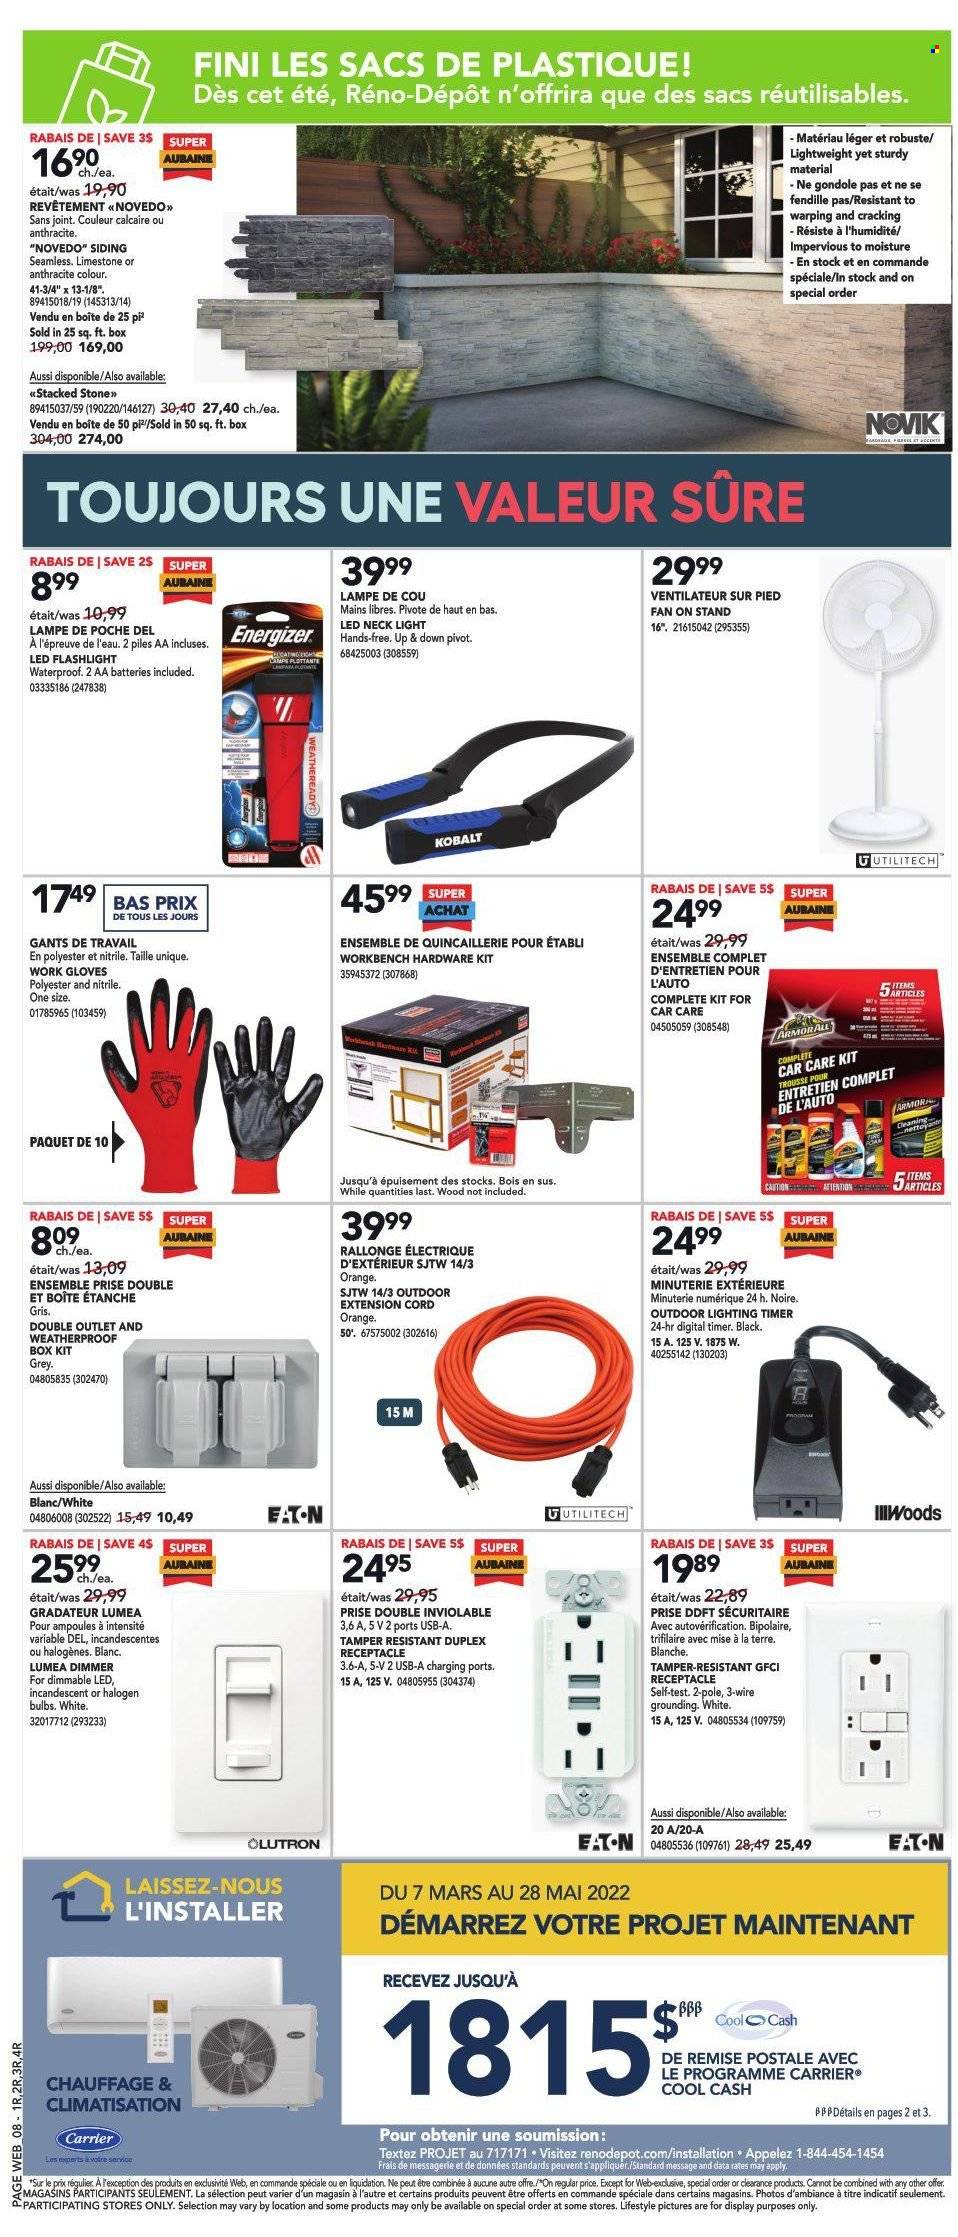 thumbnail - Réno-Dépôt Flyer - May 19, 2022 - May 25, 2022 - Sales products - work bench, lighting, siding, gloves, work gloves, extension cord, Energizer. Page 13.